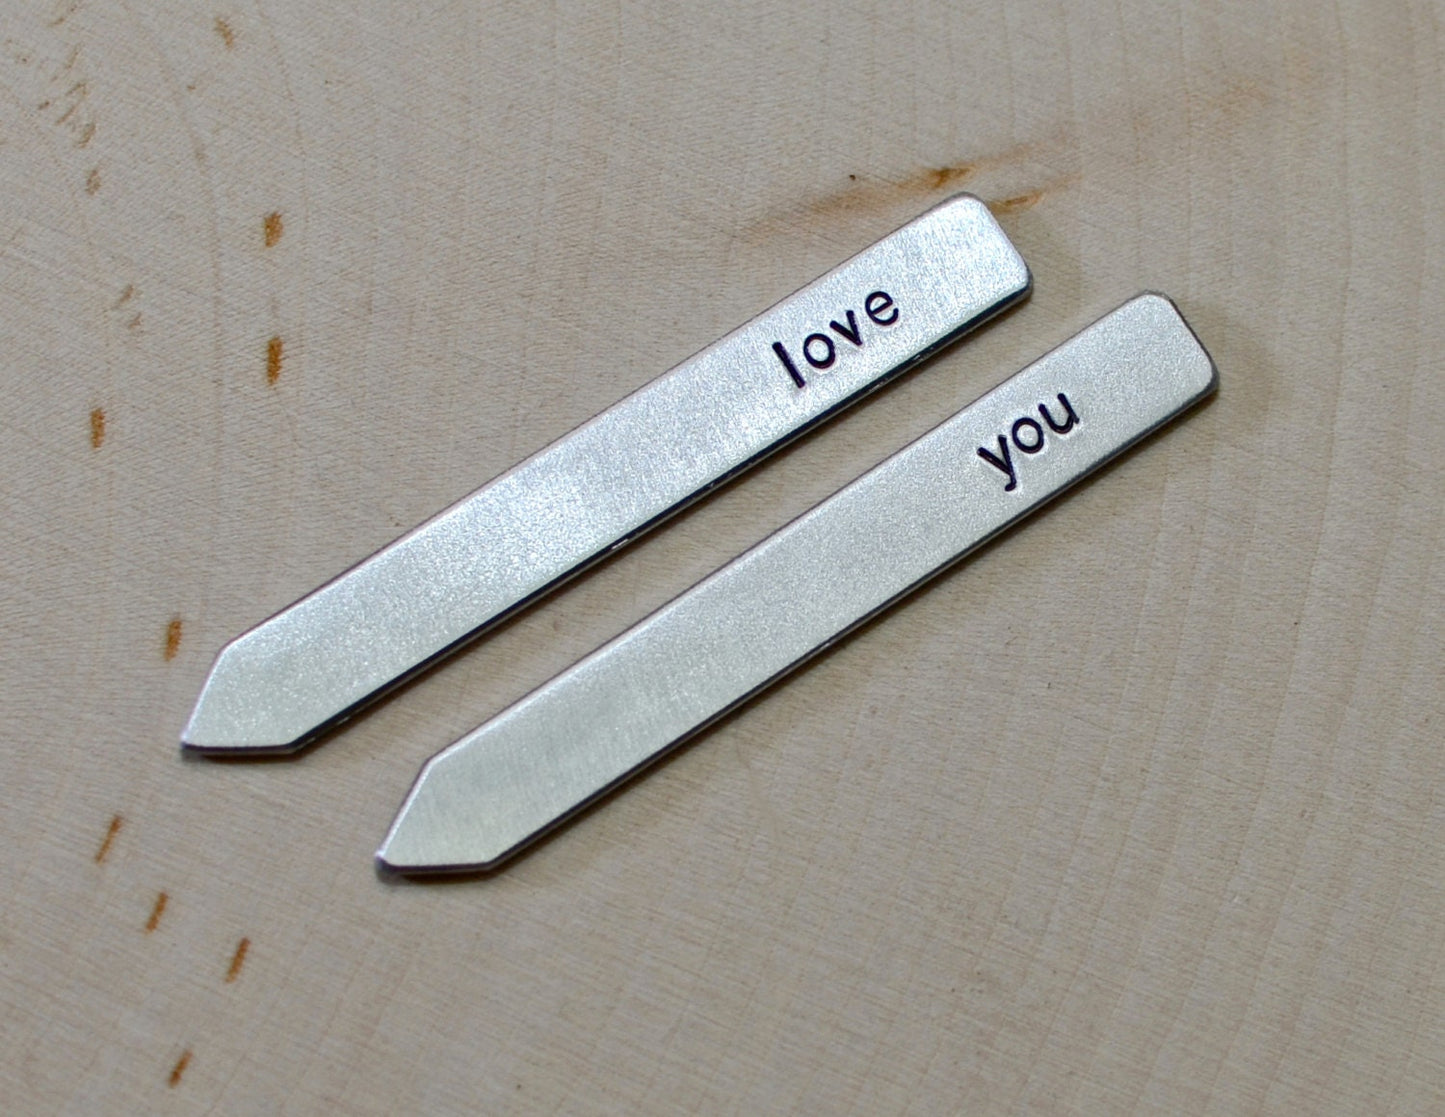 Love you collar stays for personalized gifts in Aluminum or Sterling Silver